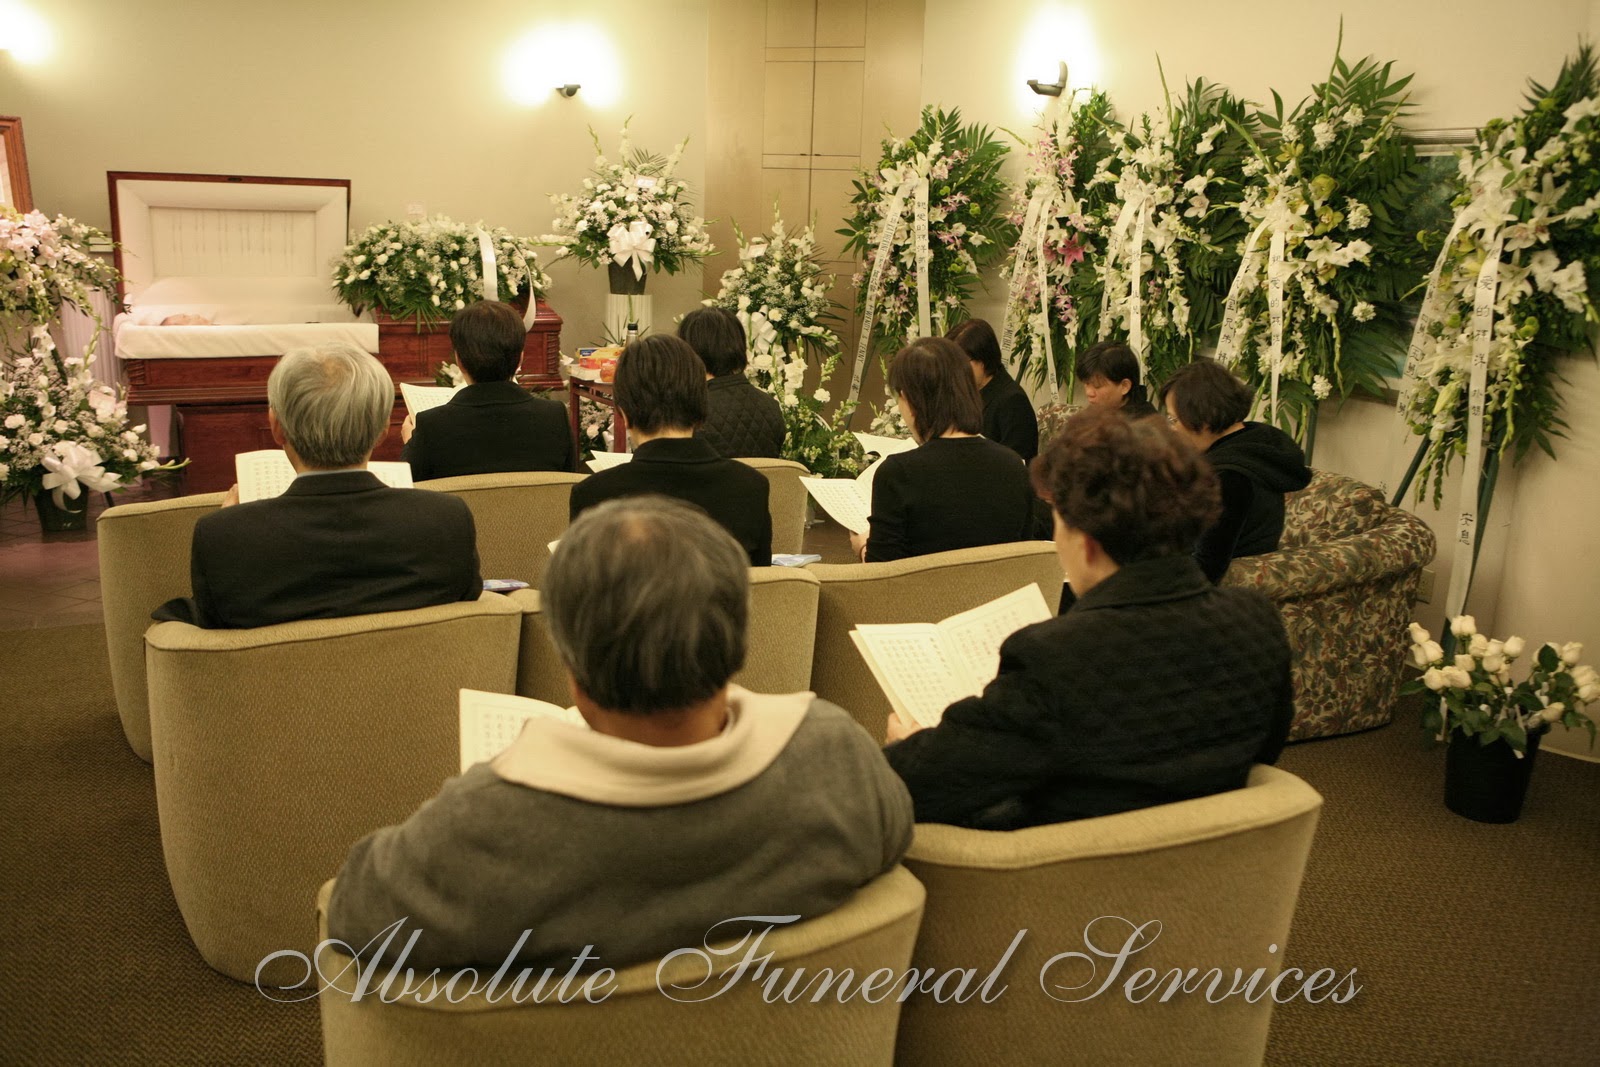 Absolute Funeral Services: Paul's Funeral - Viewing - SkyRose Chapel, Rose Hills ...1600 x 1067